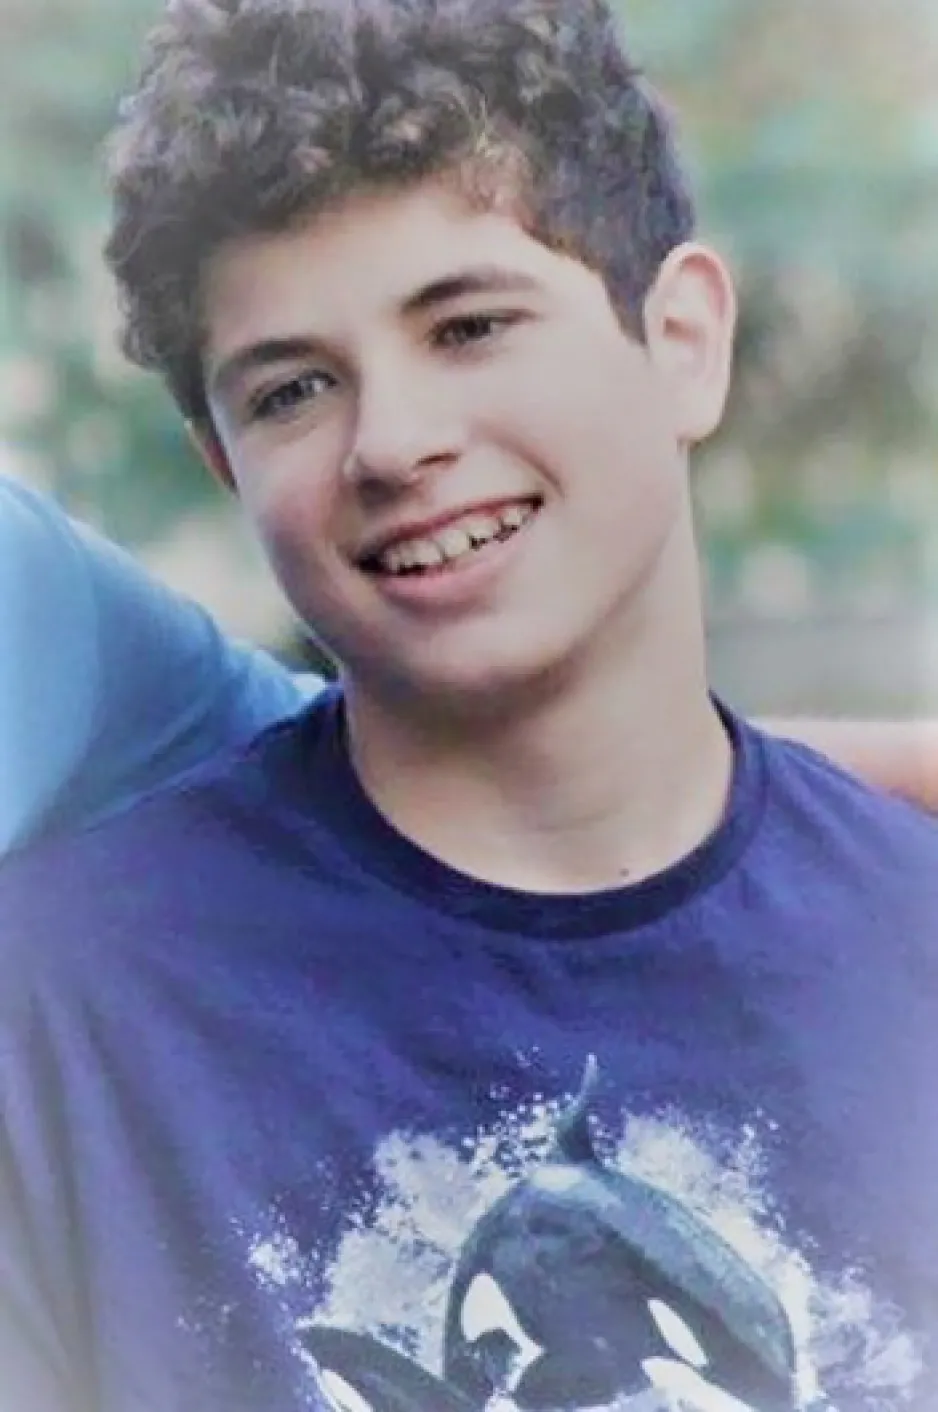 A teenaged boy wearing a purple shirt smiles and looks down from the camera.